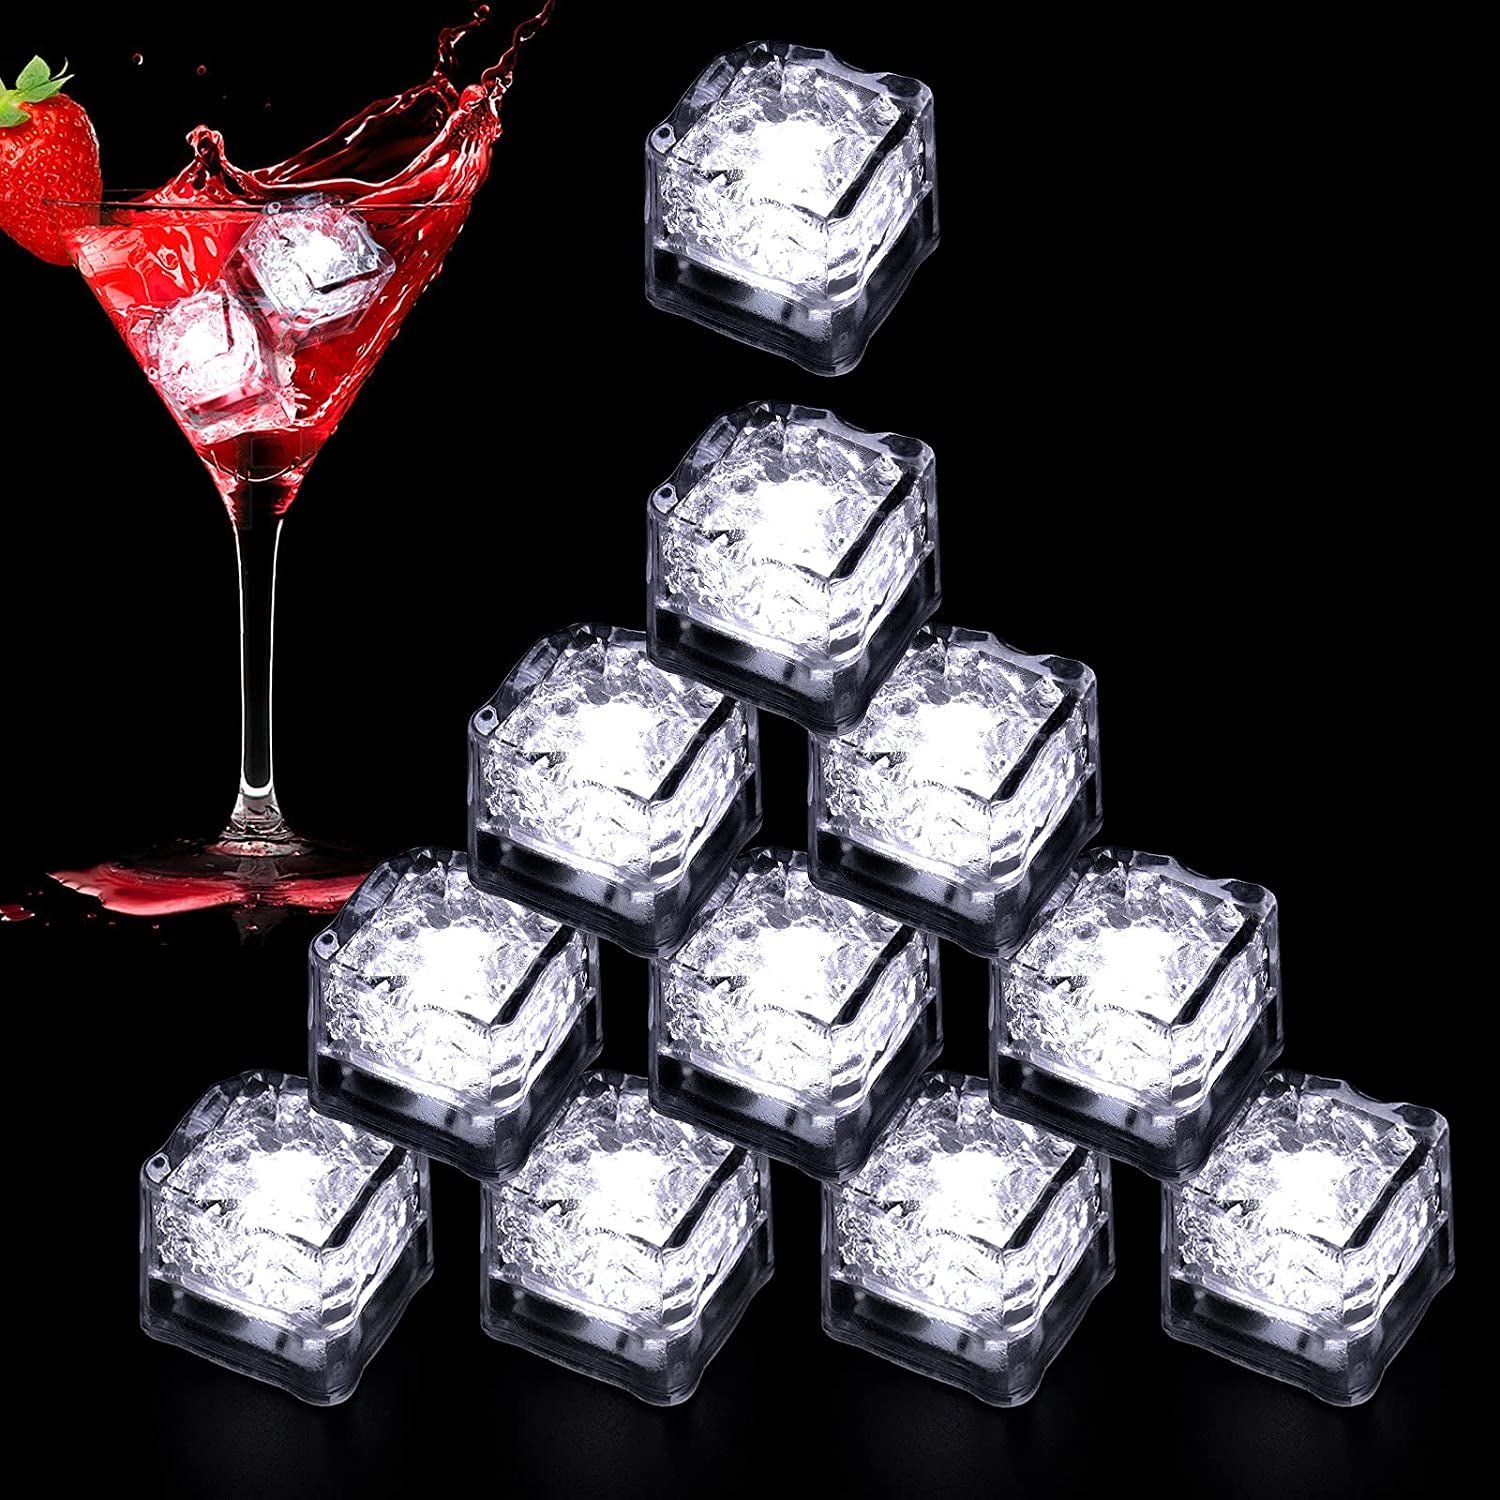 Light up Ice Cubes for Drinks, 48 PCS Green LED Ice Cubes Liquid Activated, Glow in the Dark Waterproof Ice Cubes for Home Bar Supplies Summer Party Wedding Decor